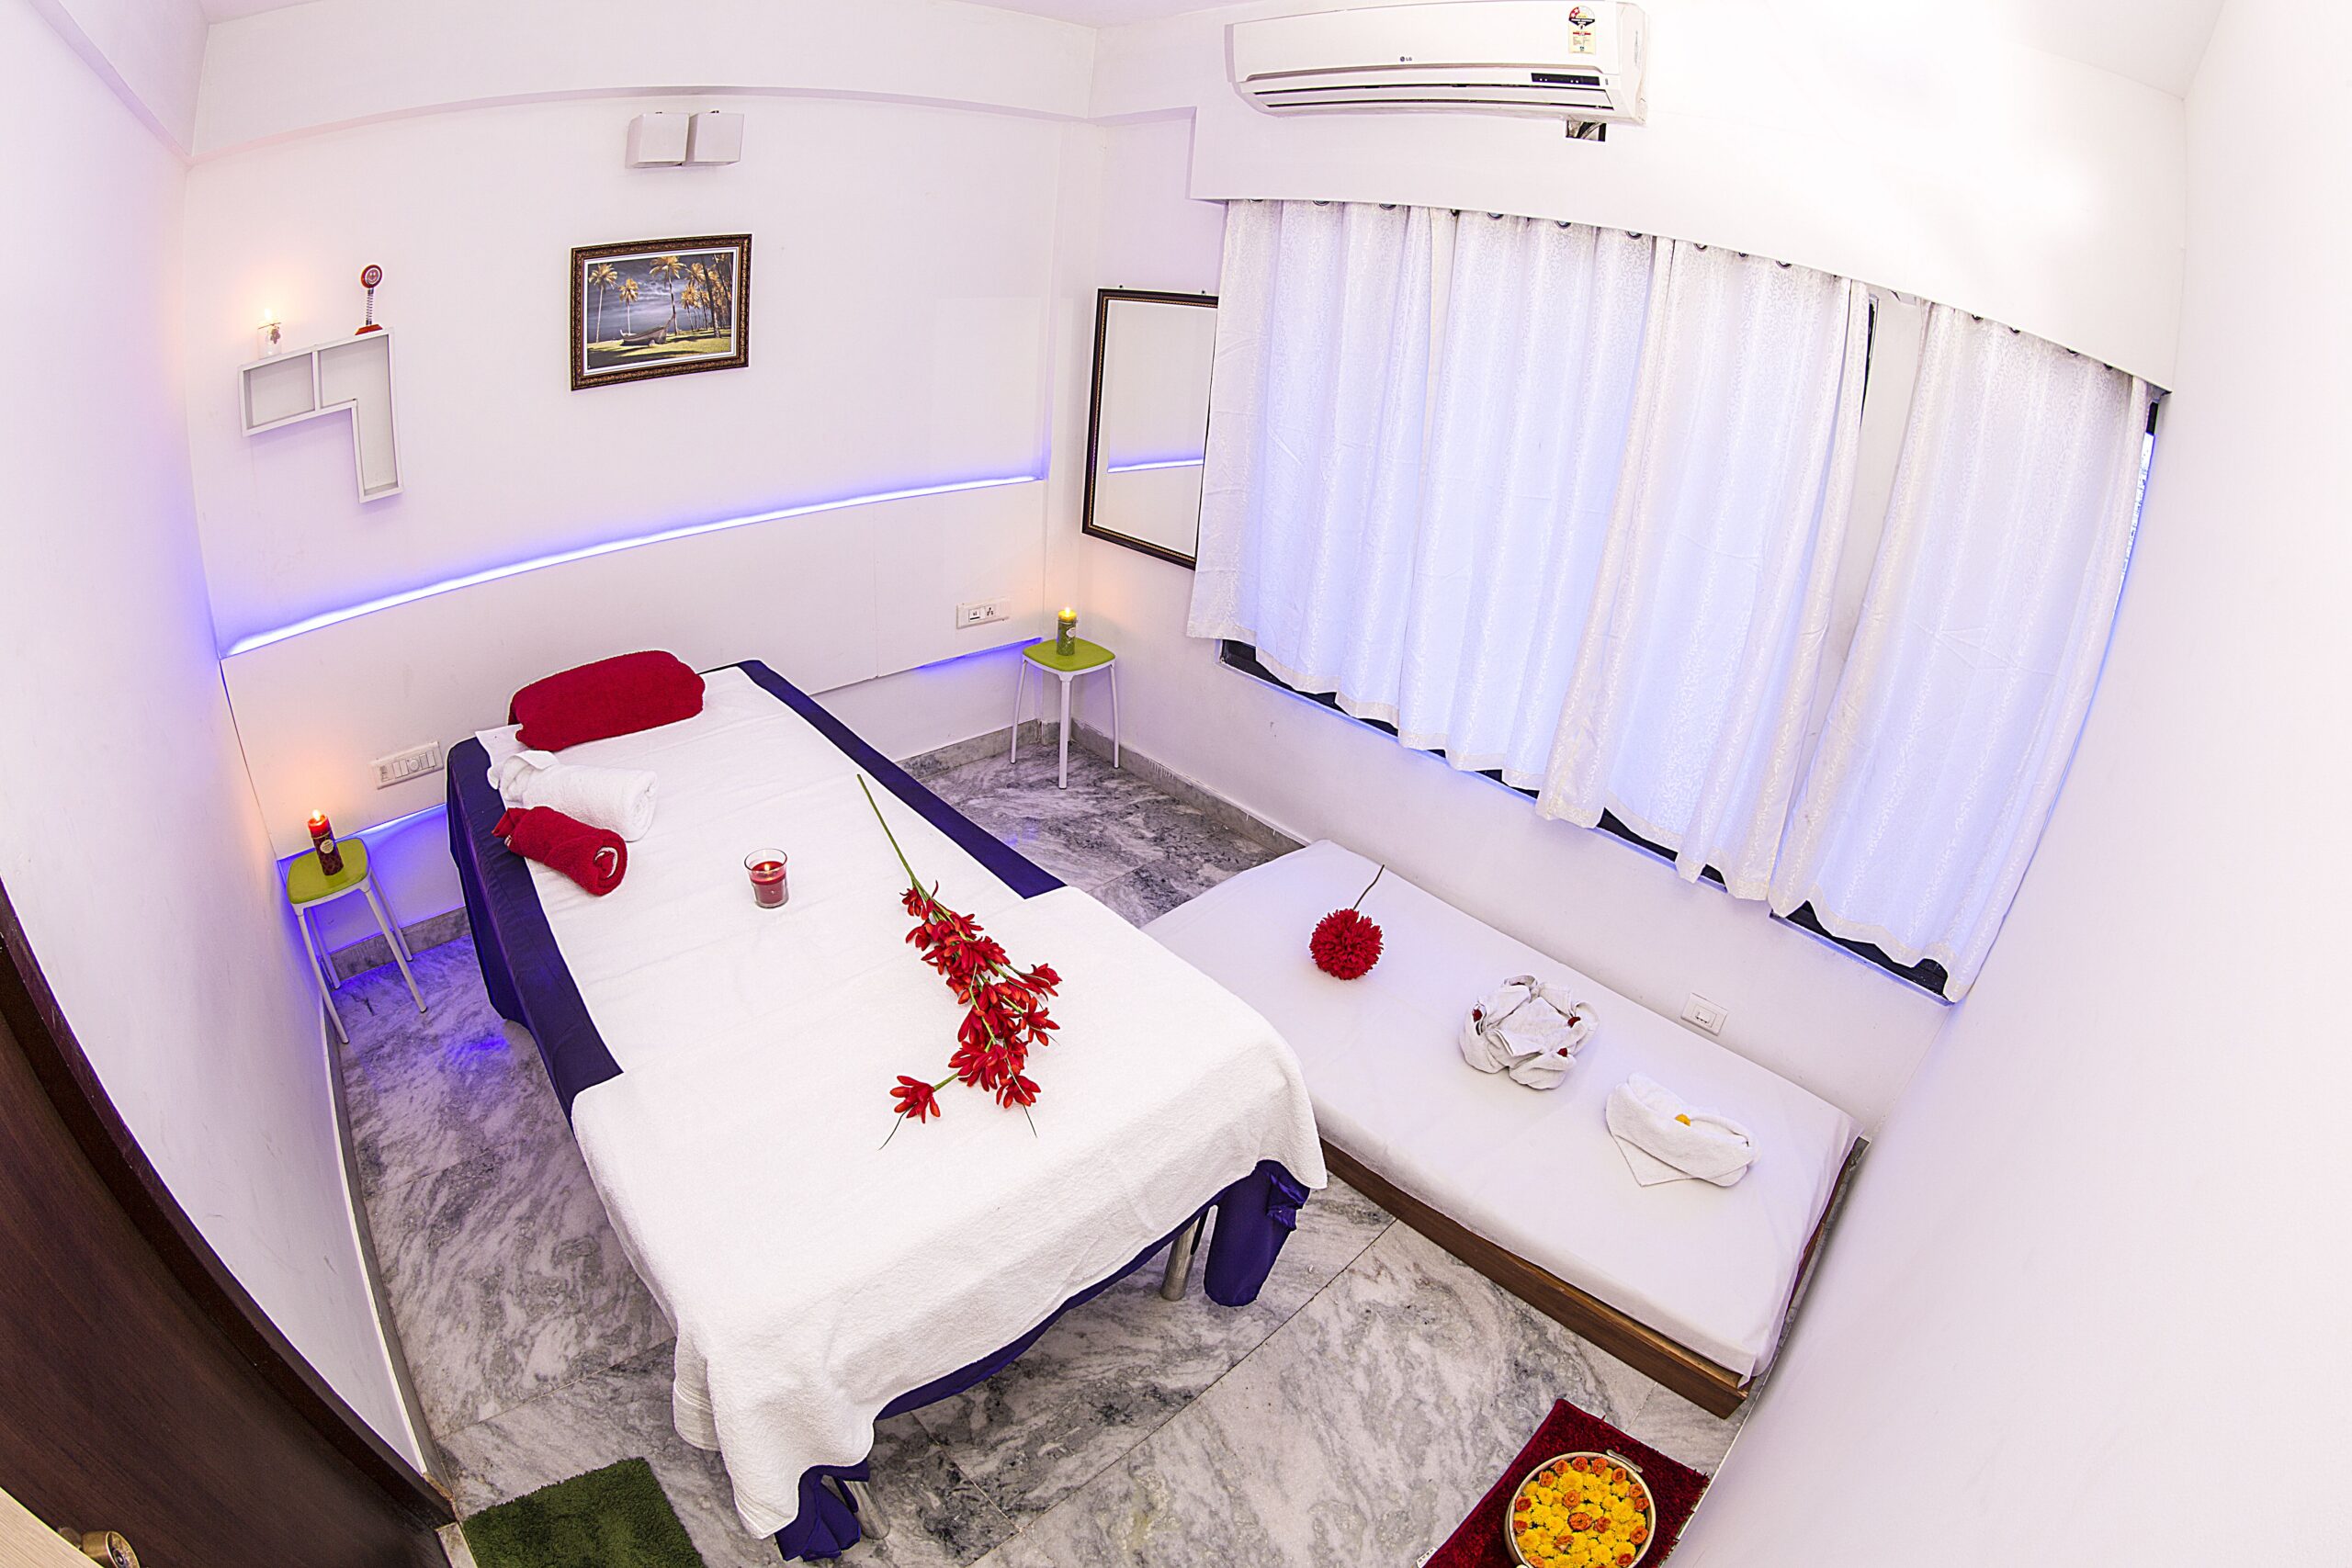 A top view of the fully air-conditioned room in the spa. Neatly arranged beds with the cot and floor bed at the side with pillow and towels rolled on into it. Lit up aromatic candles are placed at the corner of the rooms to improve the freshness of the saloon.